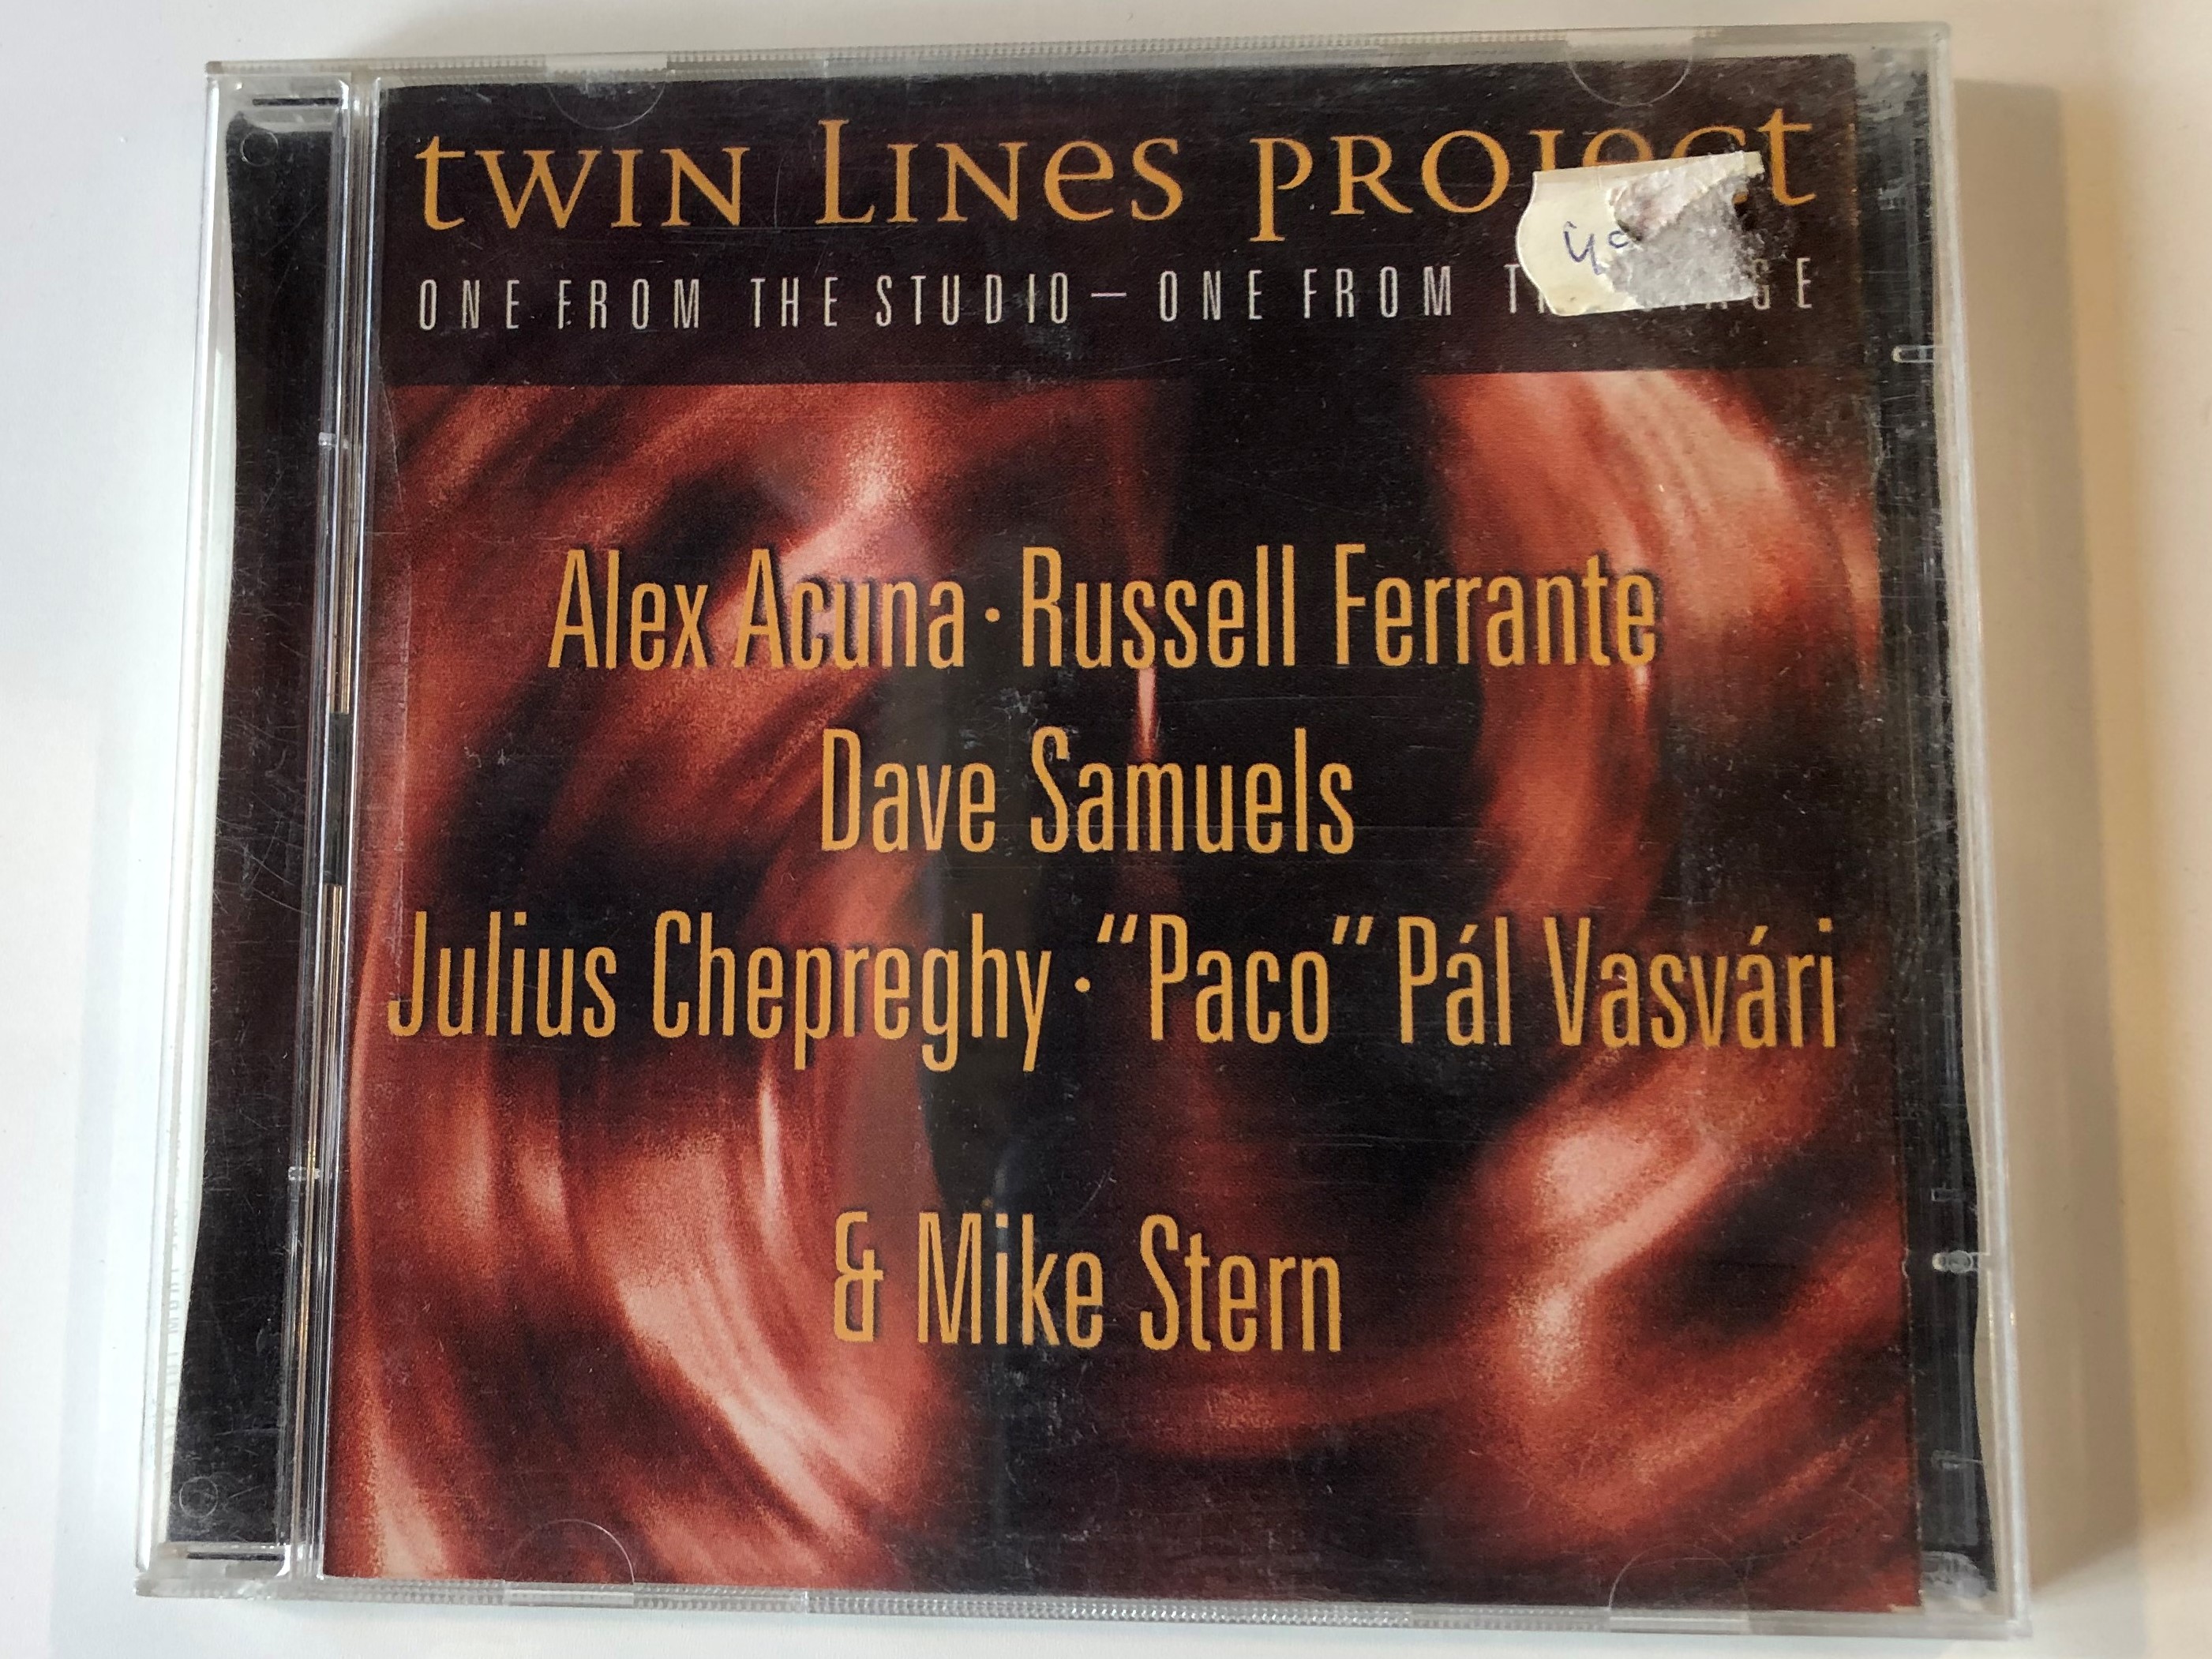 twin-lines-project-one-from-the-studio-one-from-the-stage-alex-acuna-russell-ferrante-dave-samuels-julius-chepreghy-paco-pal-vasvari-mike-stern-periferic-records-2x-audio-cd-1999-1-.jpg